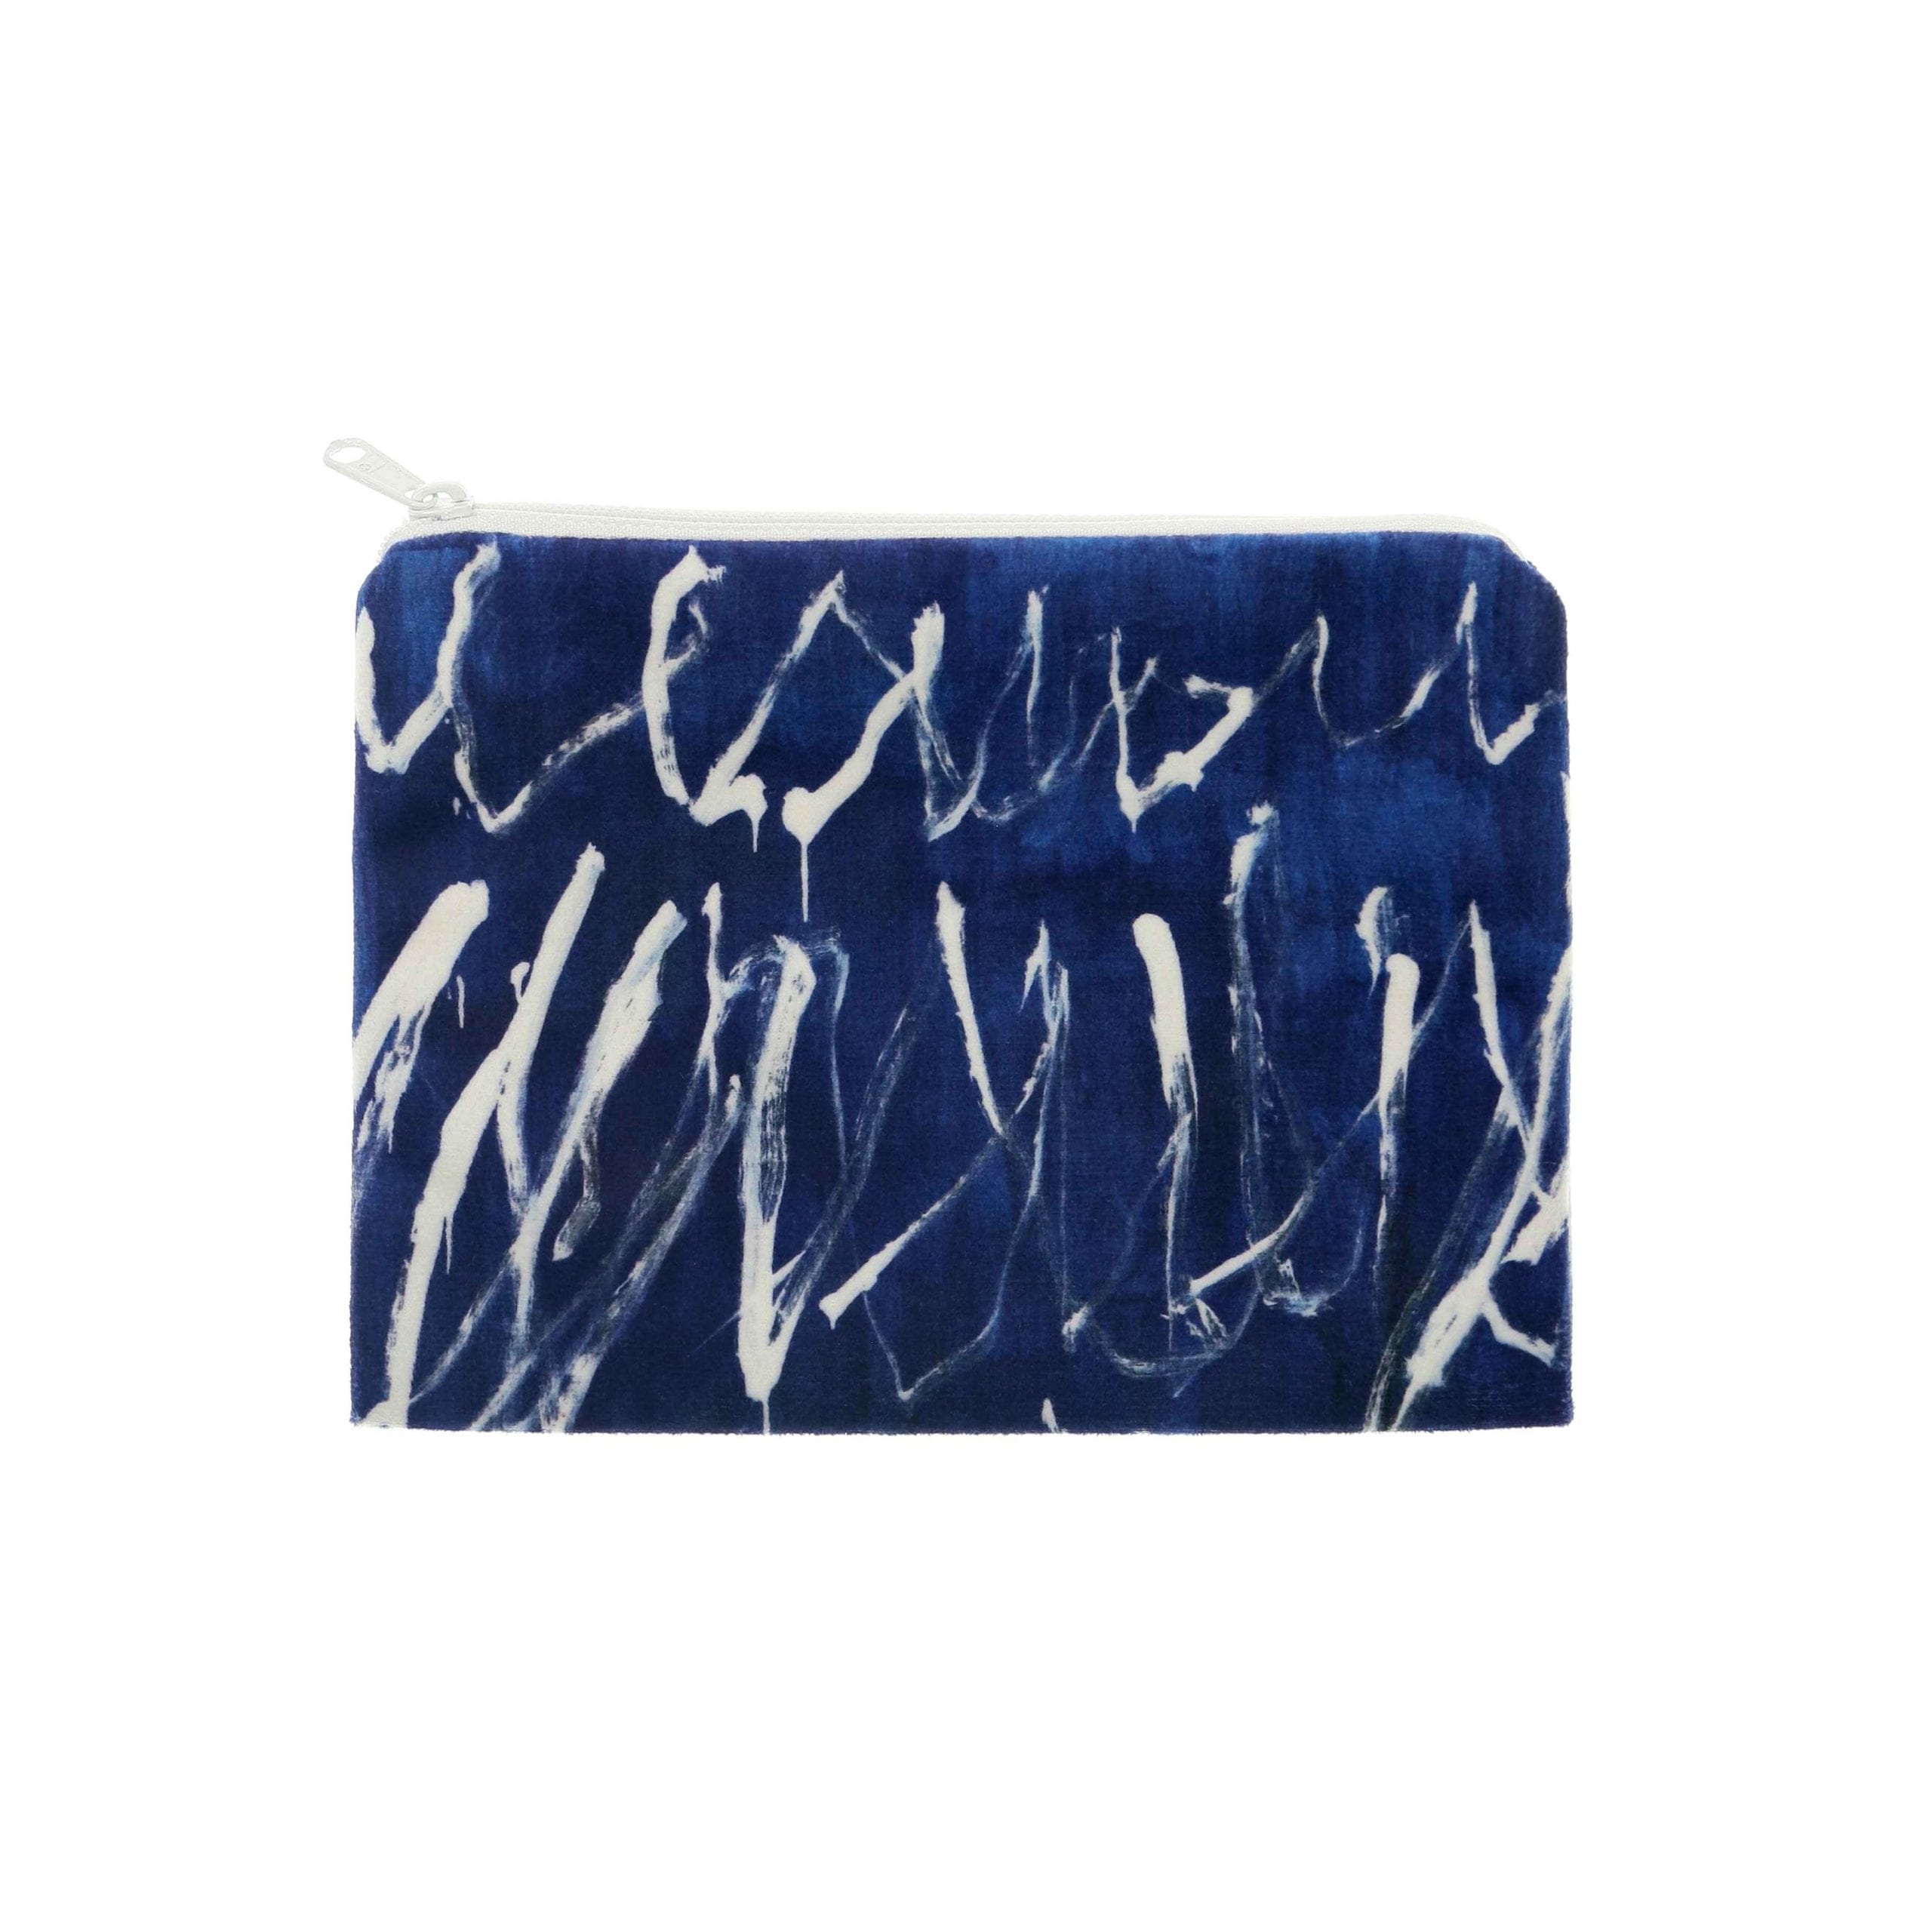 Zip Pocket CY TWOMBLY